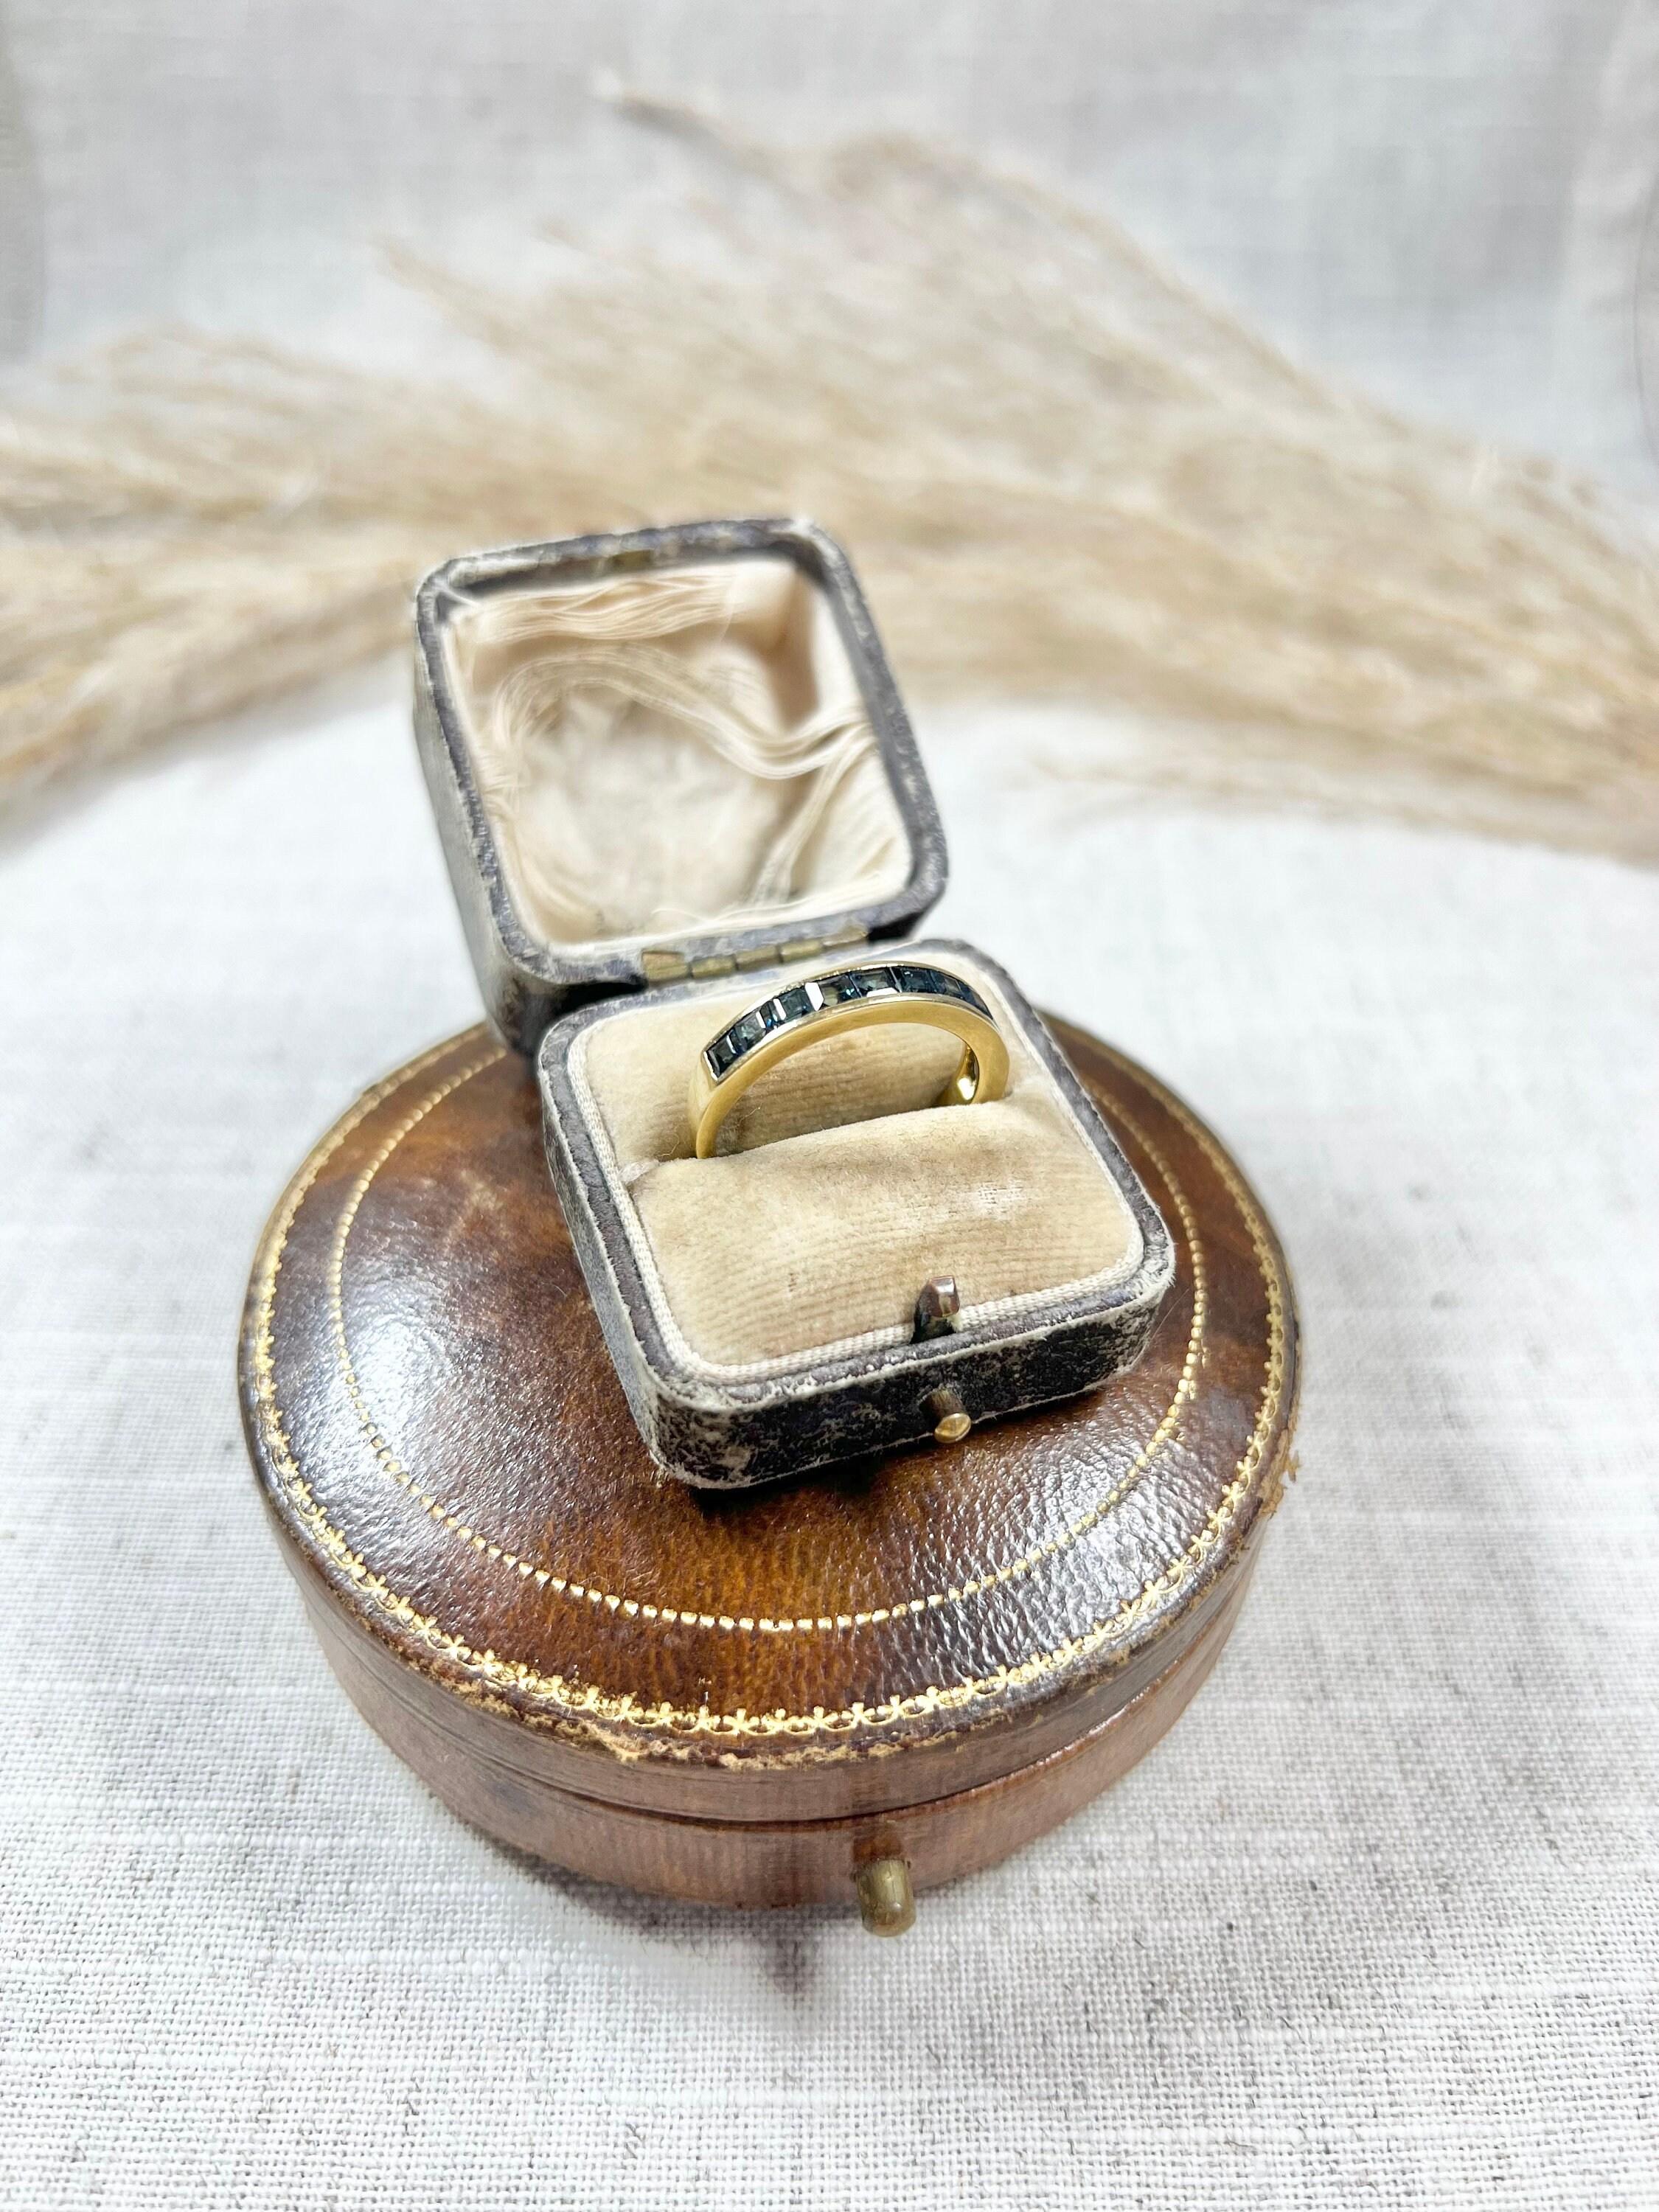 Vintage Sapphire Half Eternity Ring 

18ct Gold Stamped

Circa 1940s

This exquisite 18ct gold half-eternity ring is a true statement piece. Set with a stunning line of beautiful blue-calibrated natural sapphires, the ring exudes vintage glamour and